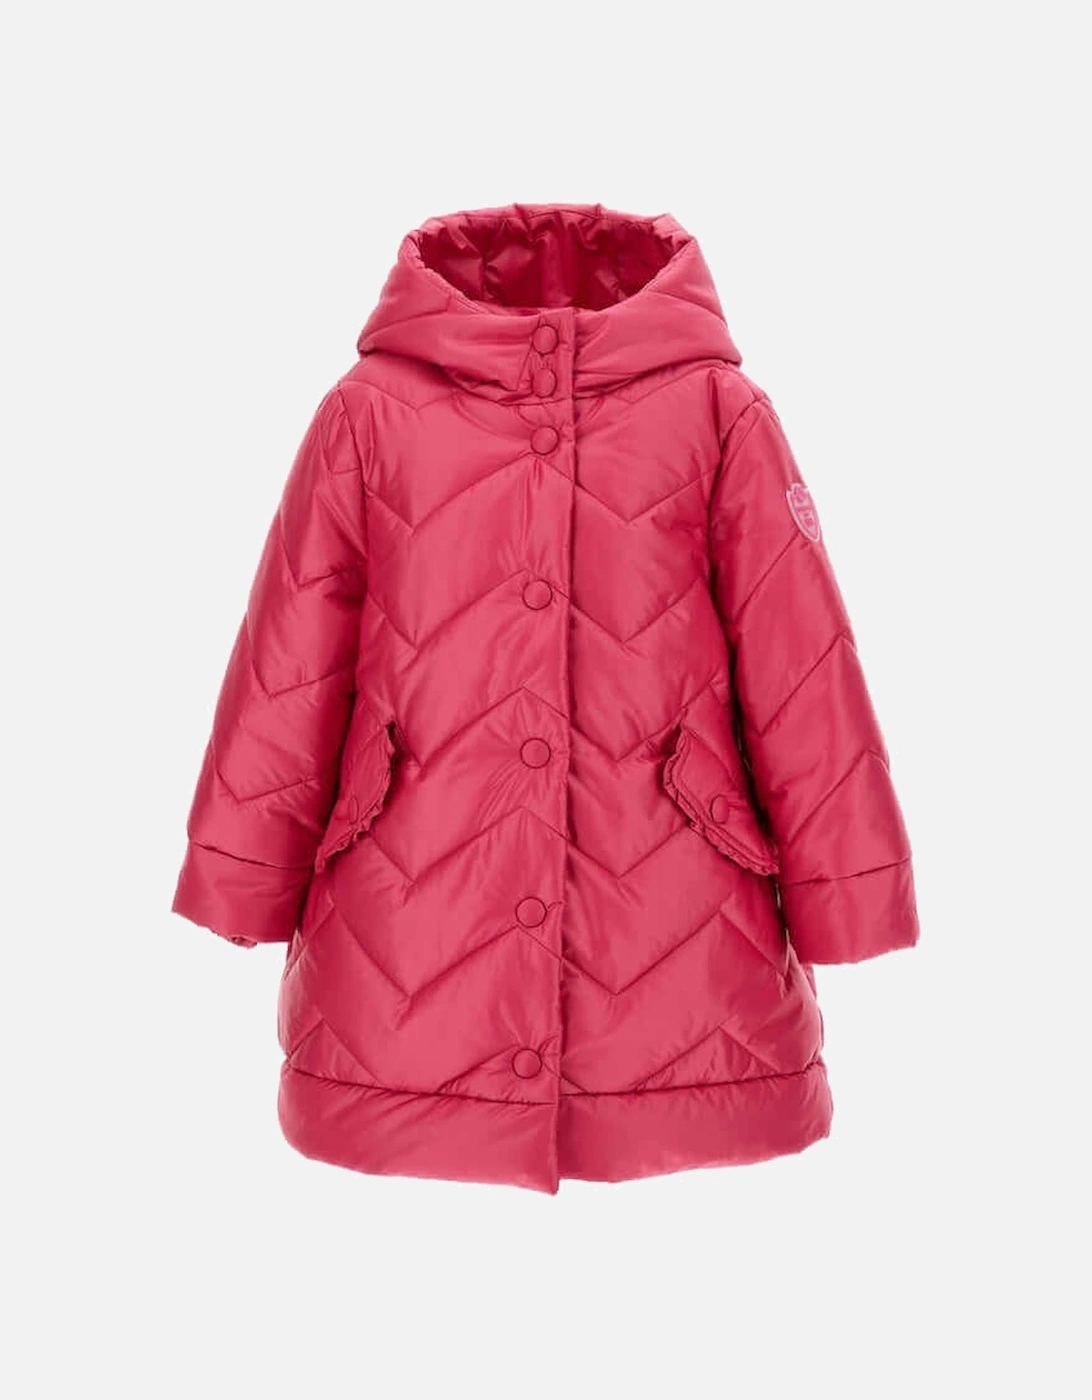 Girls Pink Quilted Jacket, 8 of 7